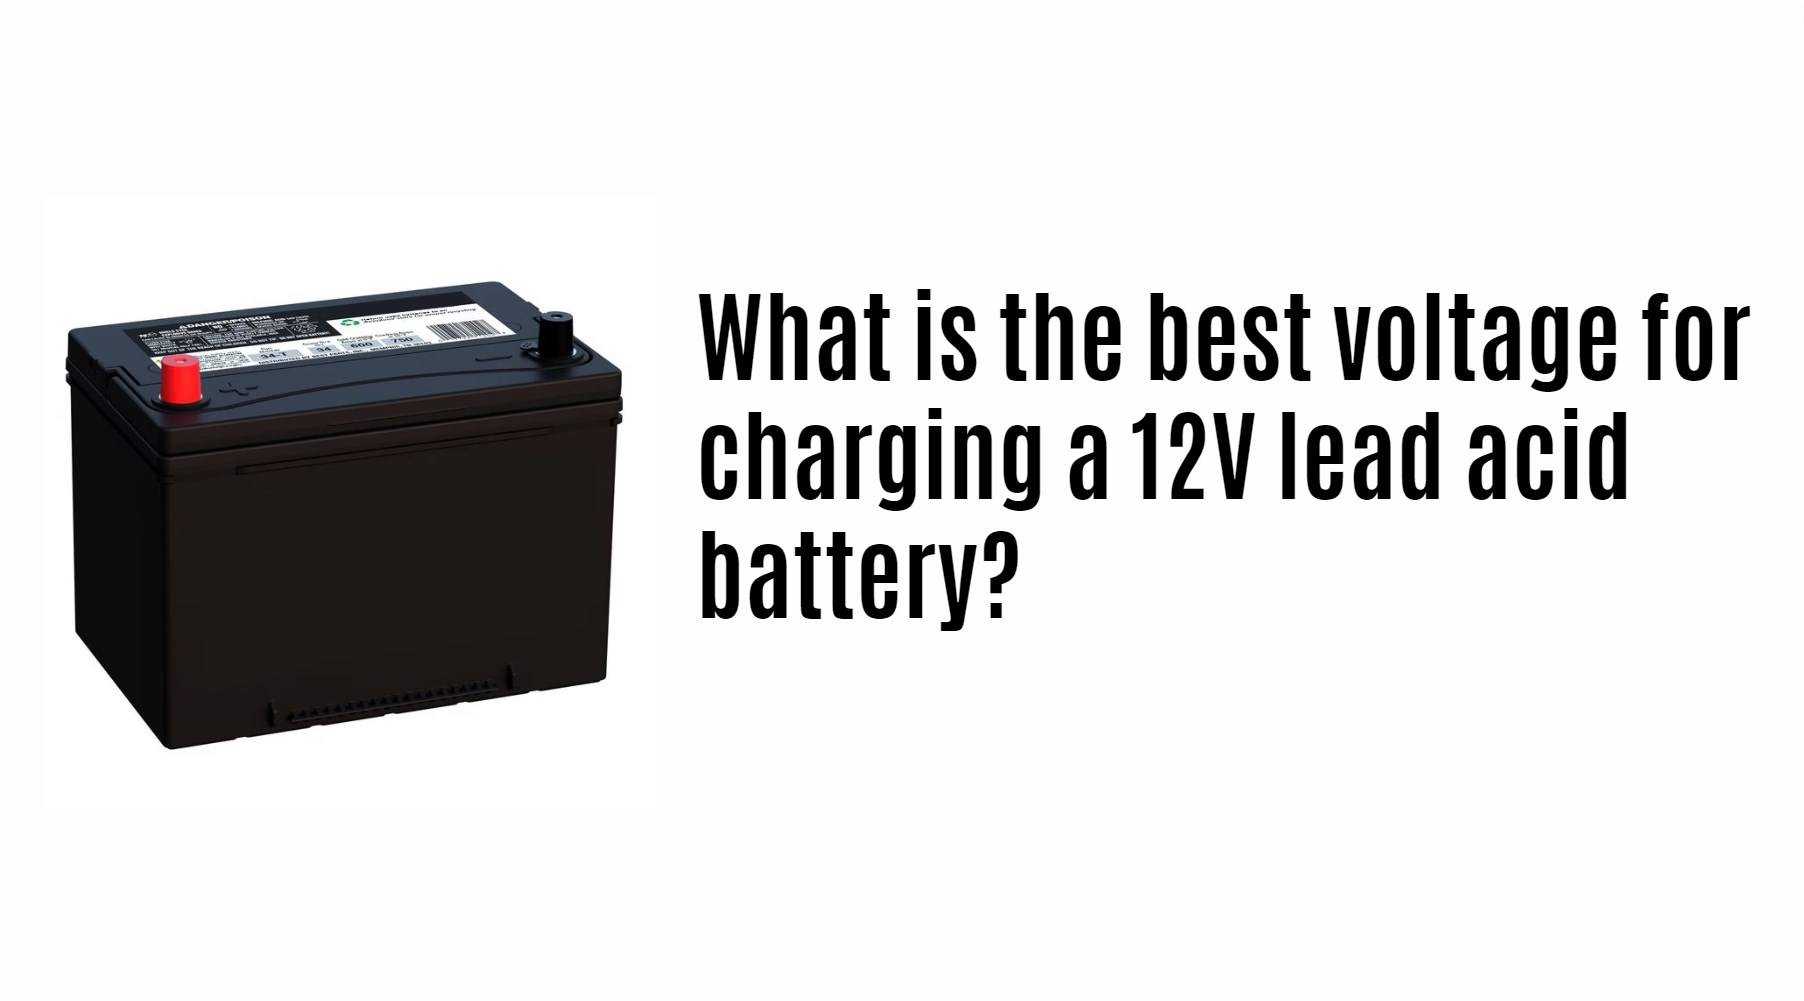 What is the best voltage for charging a 12V lead acid battery?